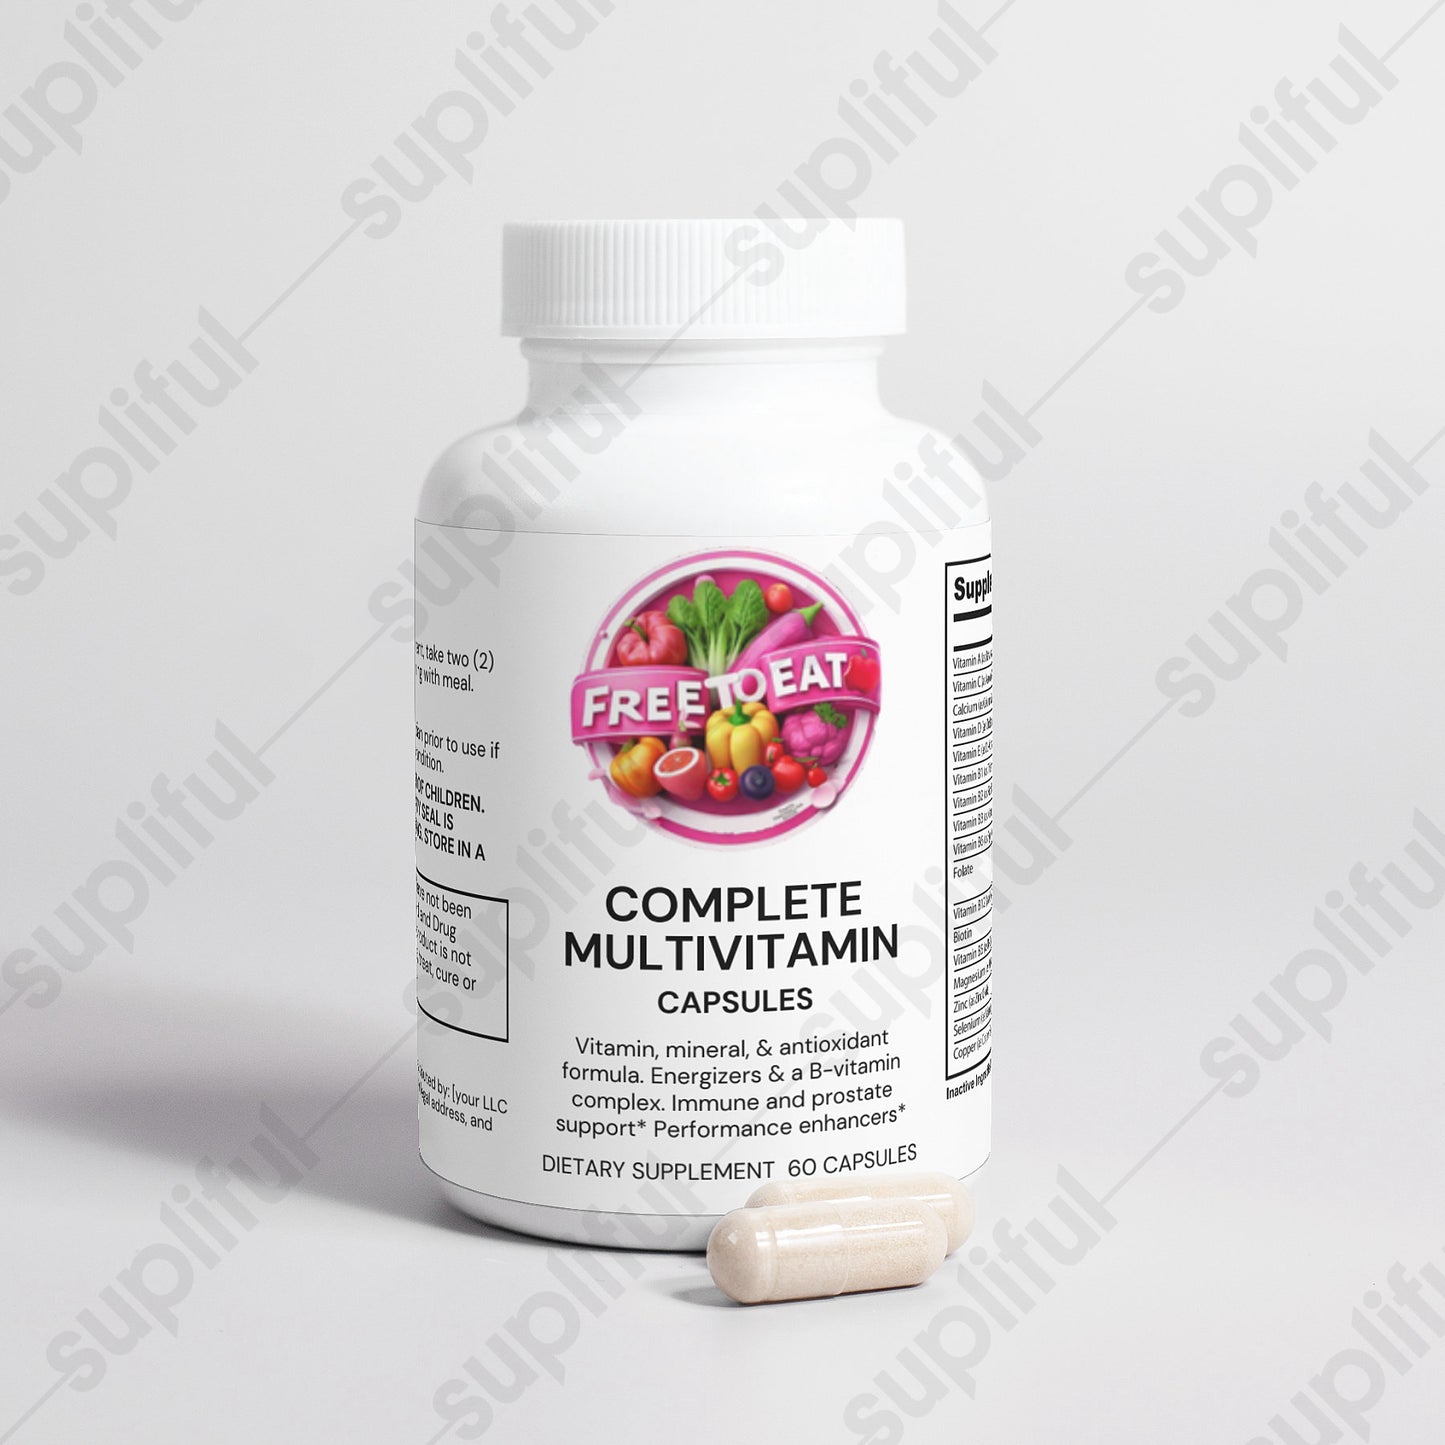 Free To Eat: Complete Multivitamin